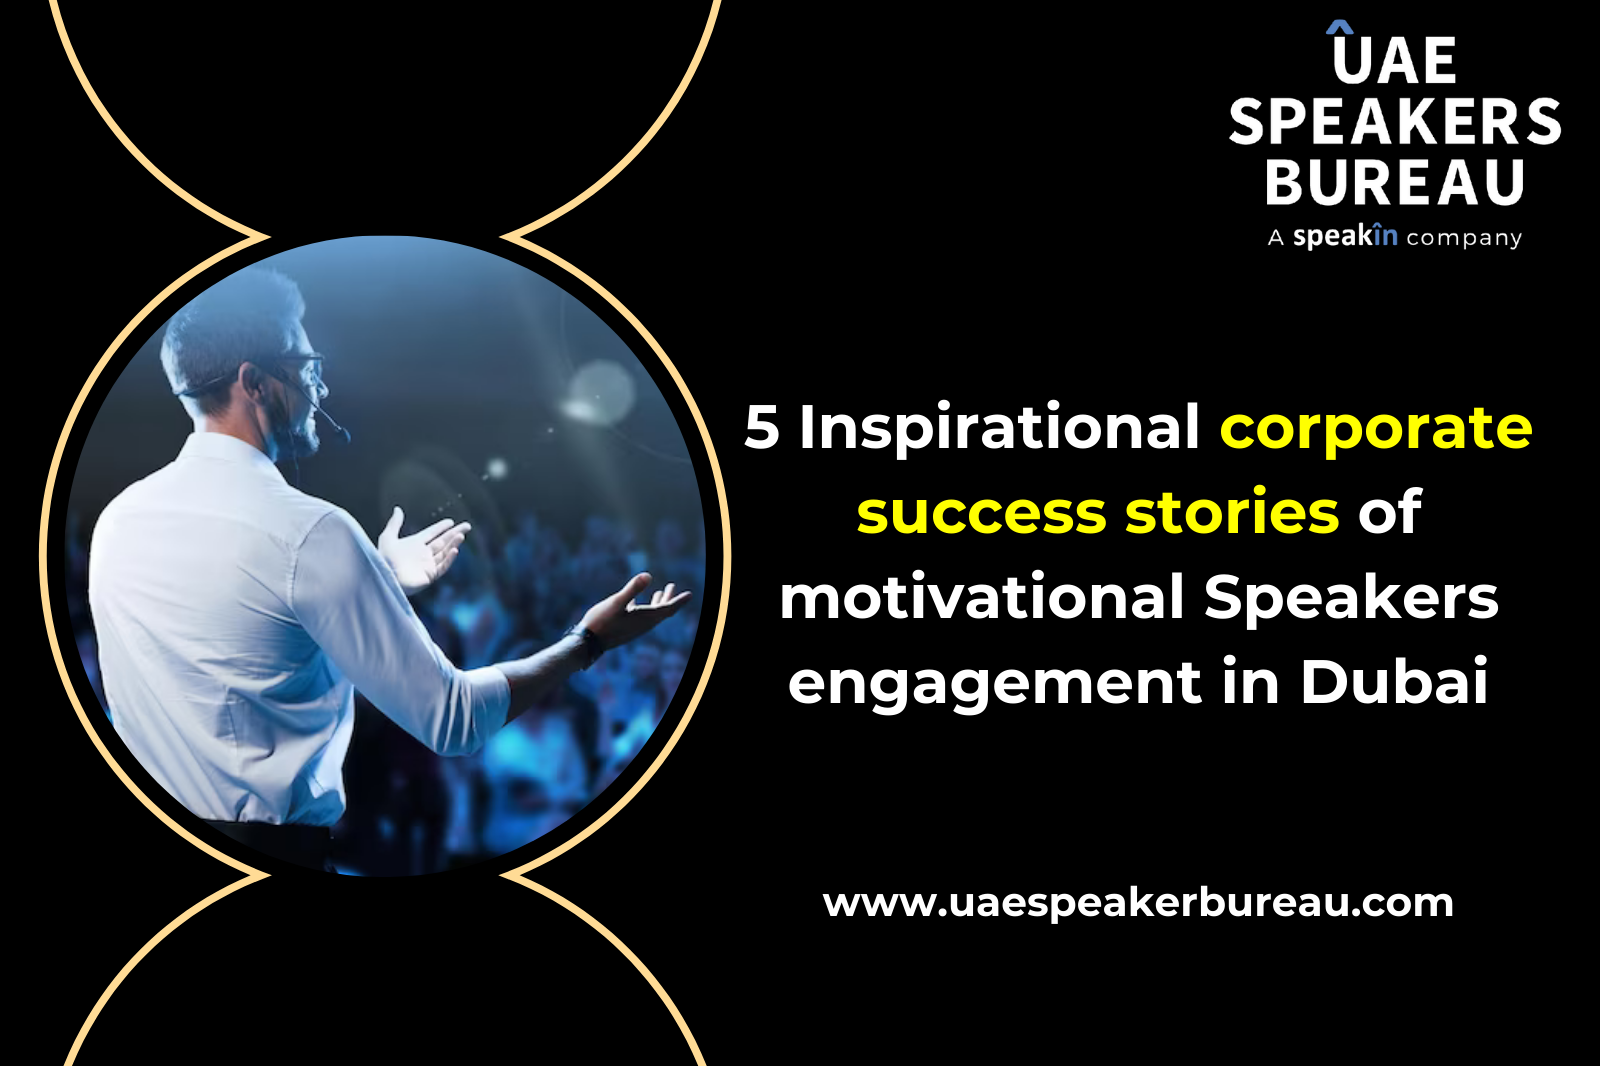 5 Inspirational Corporate Success Stories of Motivational Speakers Engagement in Dubai